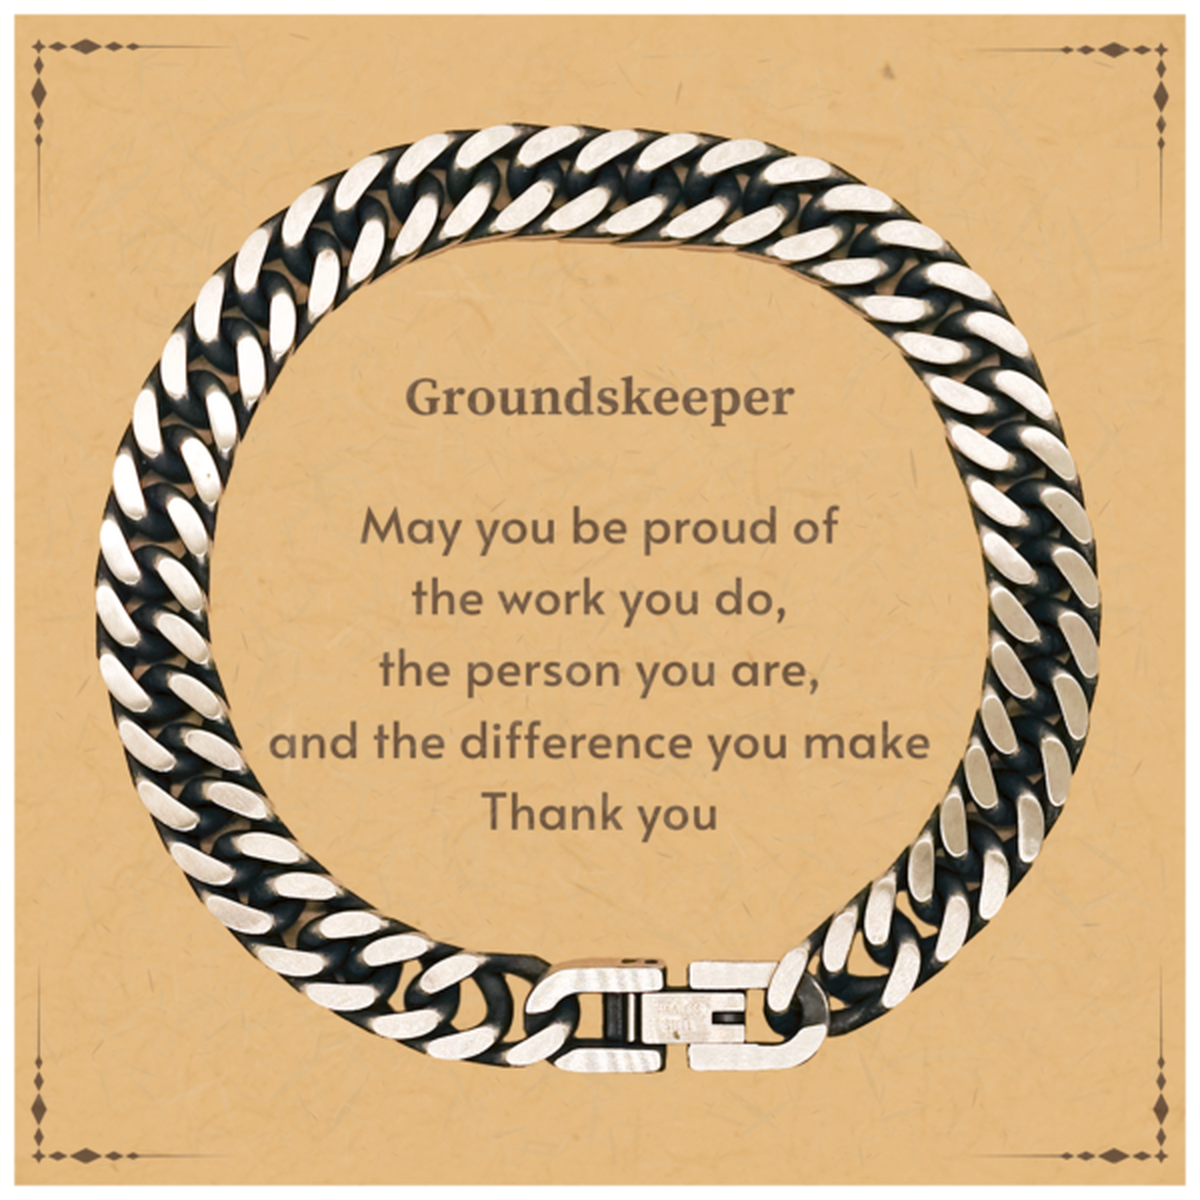 Heartwarming Cuban Link Chain Bracelet Retirement Coworkers Gifts for Groundskeeper, Groundskeeper May You be proud of the work you do, the person you are Gifts for Boss Men Women Friends